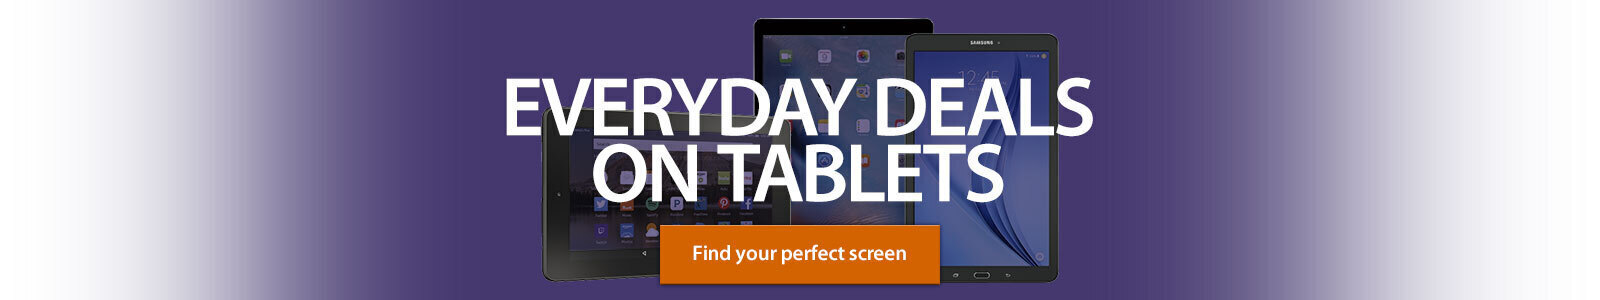 Every day deals on tablets. Find your perfect screen.